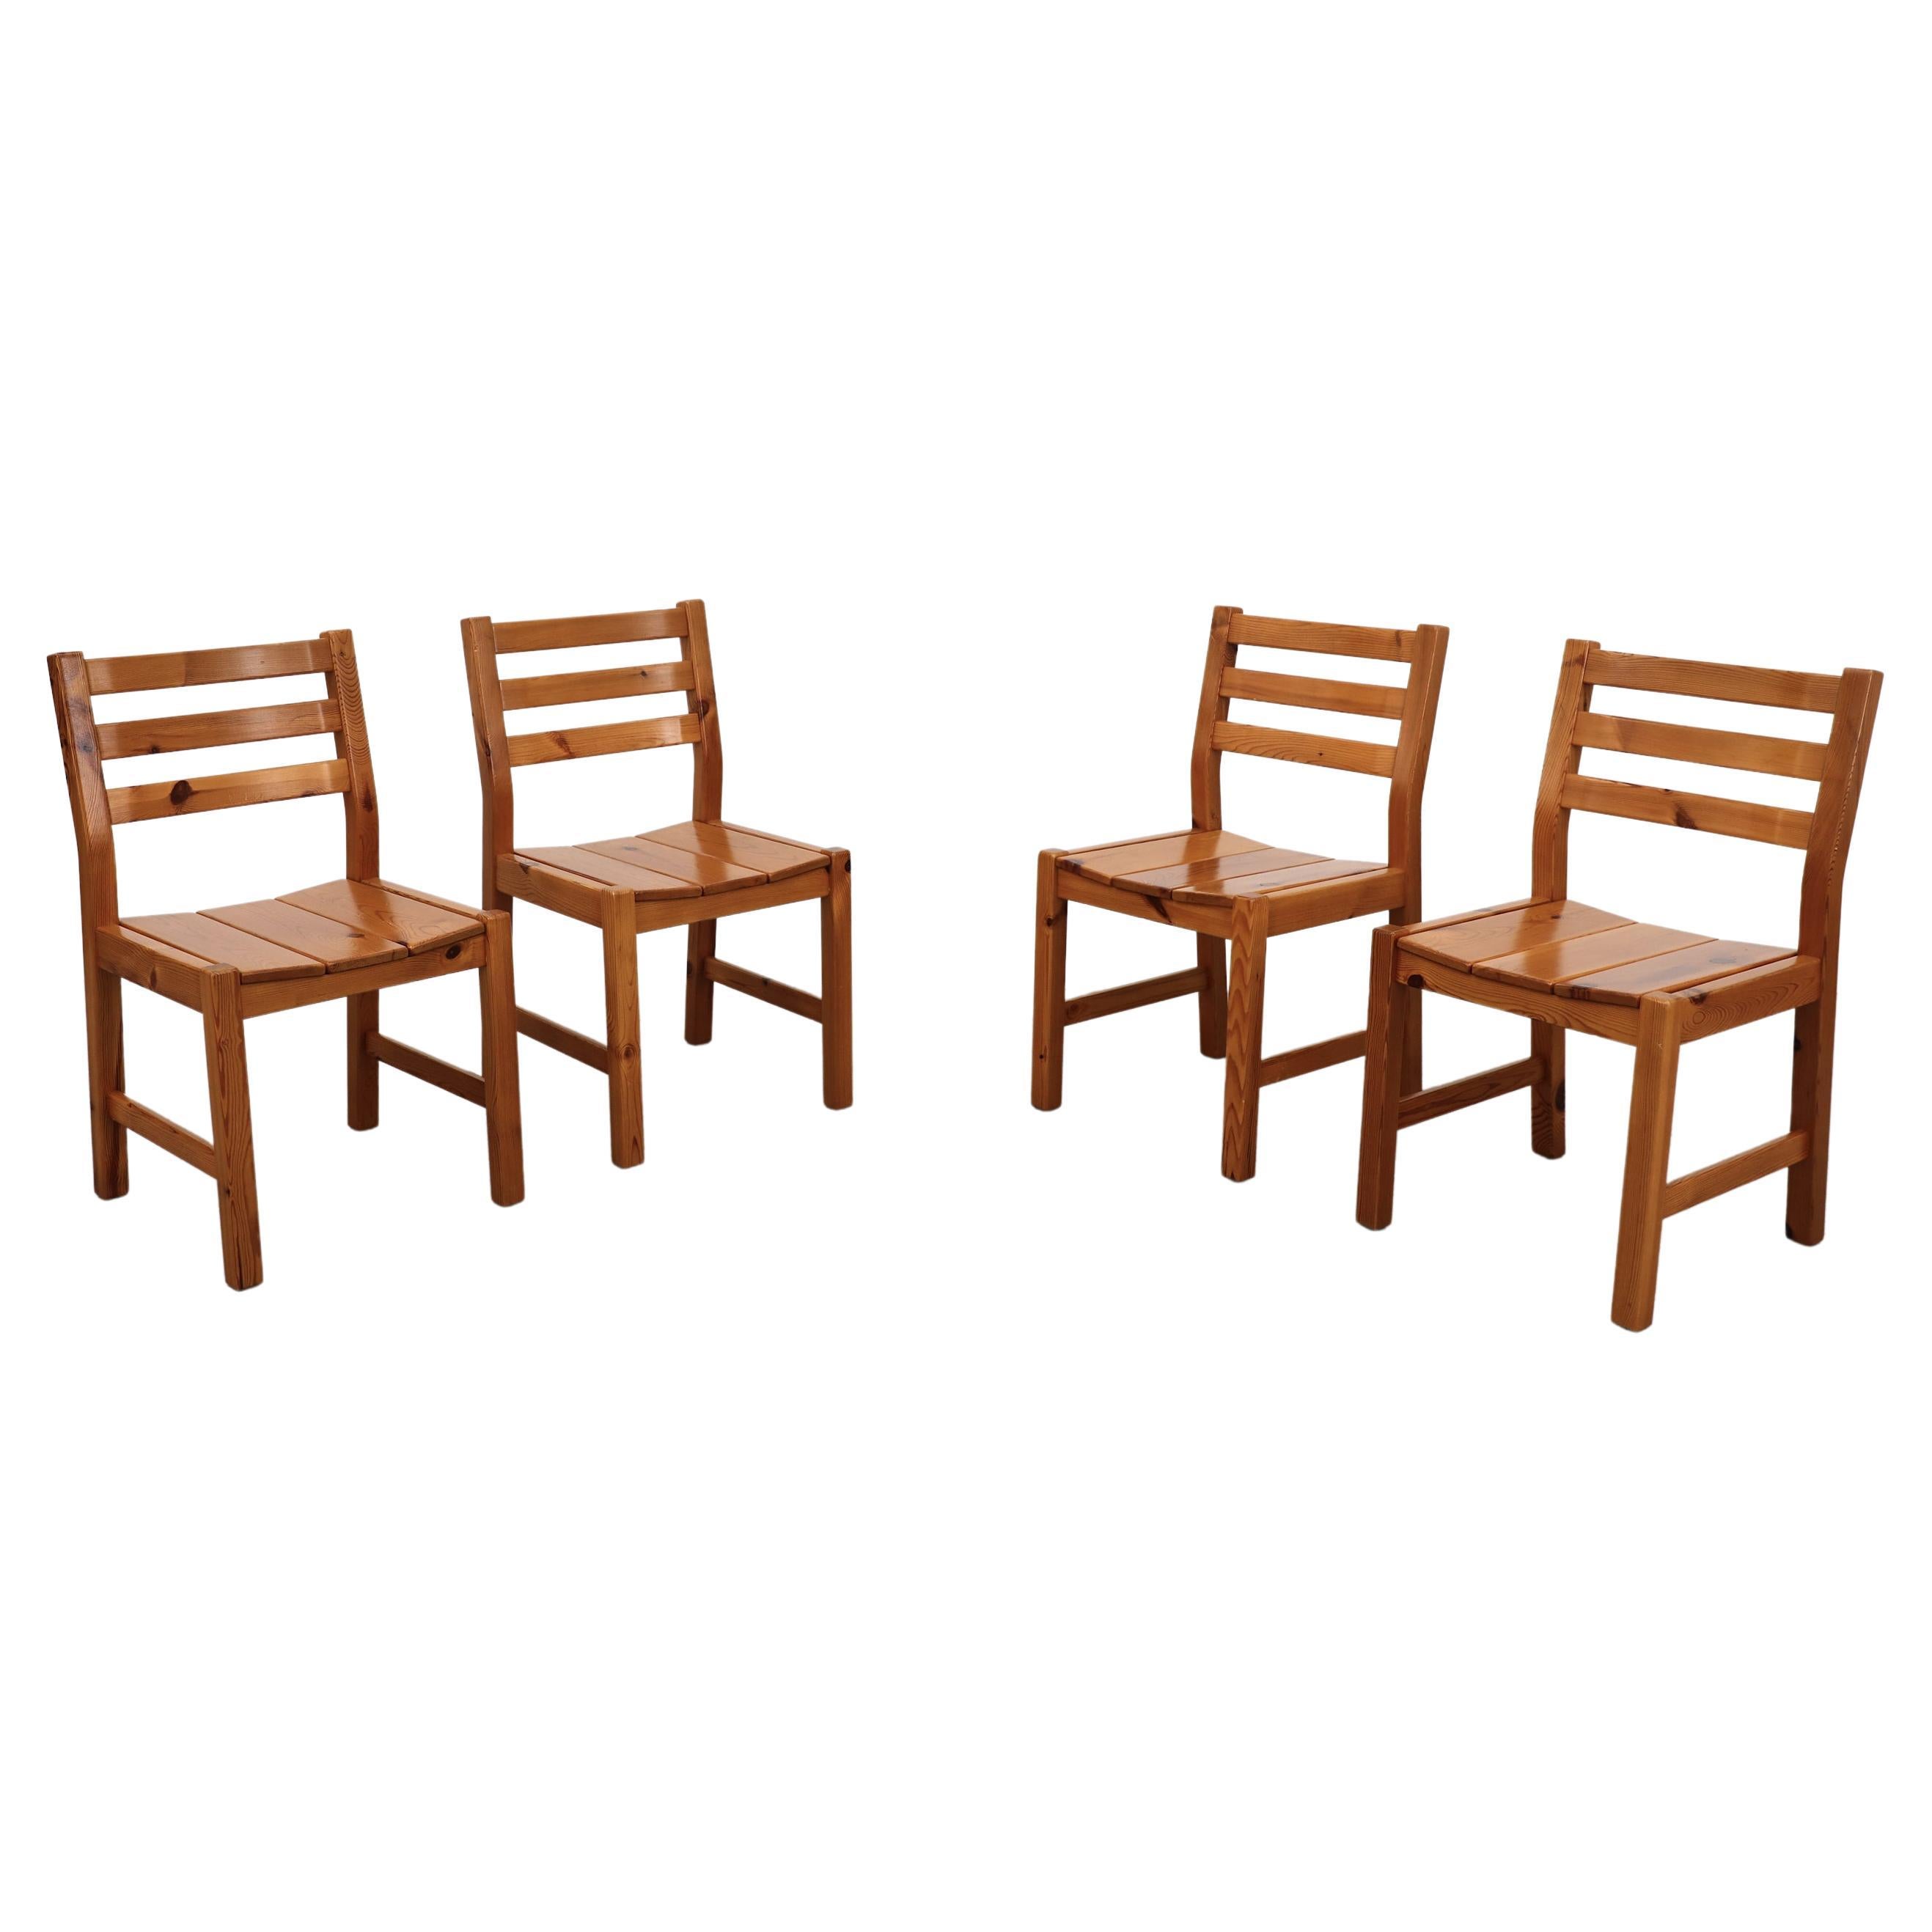 Set of 4 Ate van Apeldoorn Style Ladder Back, Slatted 1970's Pine Dining Chairs For Sale